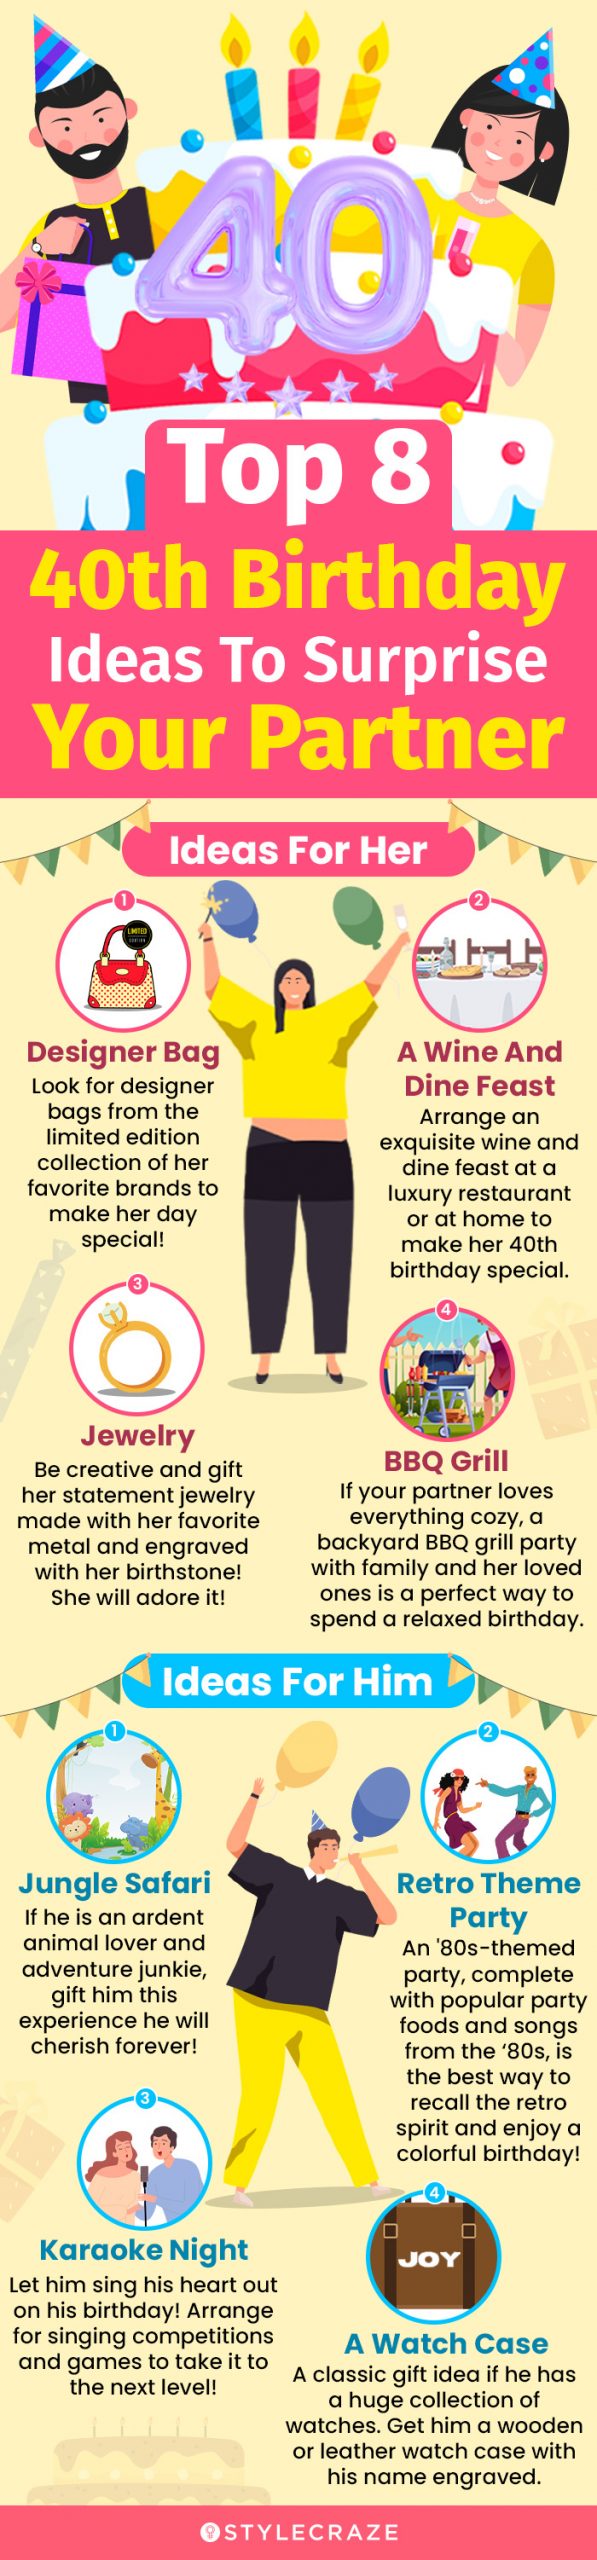 top 8 40th birthday ideas to surprise your partner (infographic)